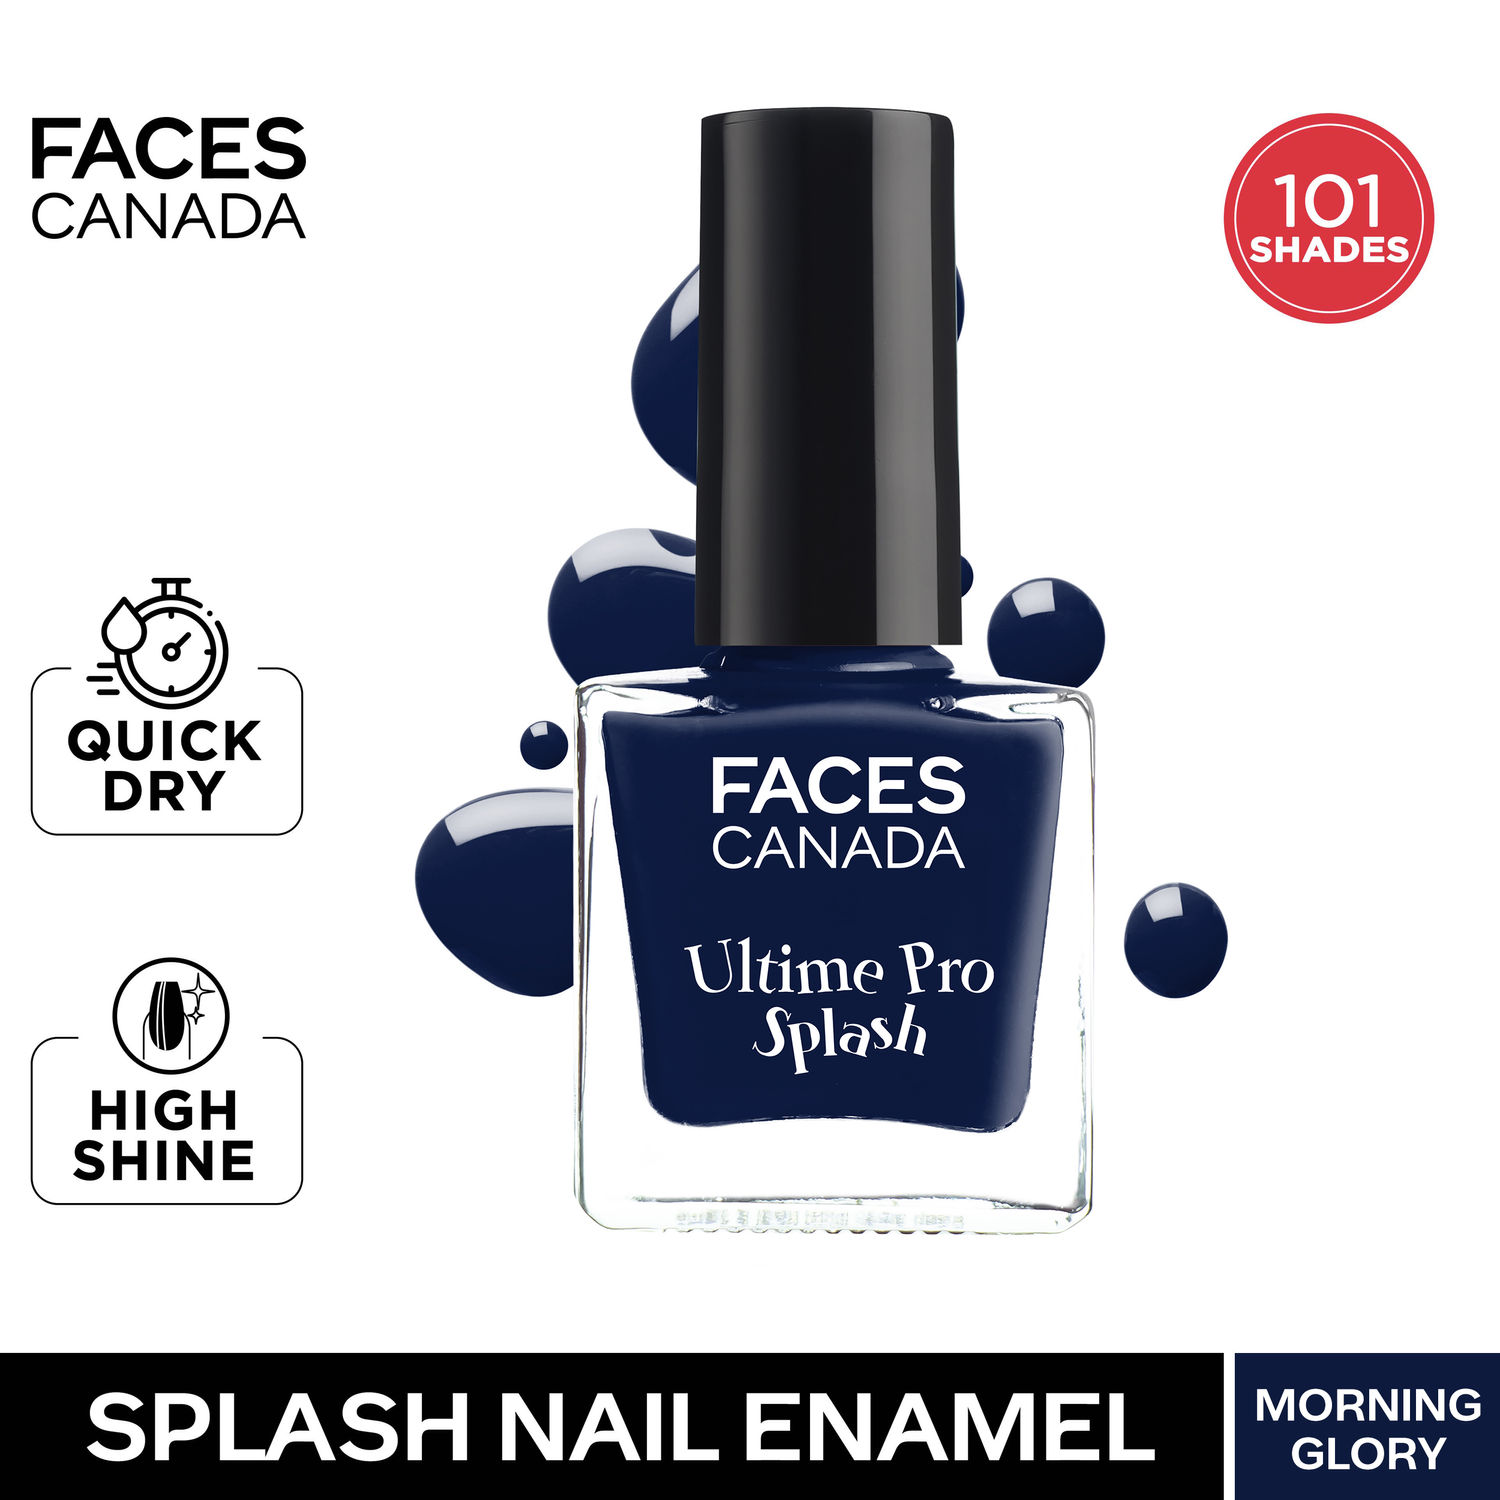 Faces Canada Ultime Pro Splash Nail Paint (Marmalade 108) Price - Buy Online  at ₹110 in India